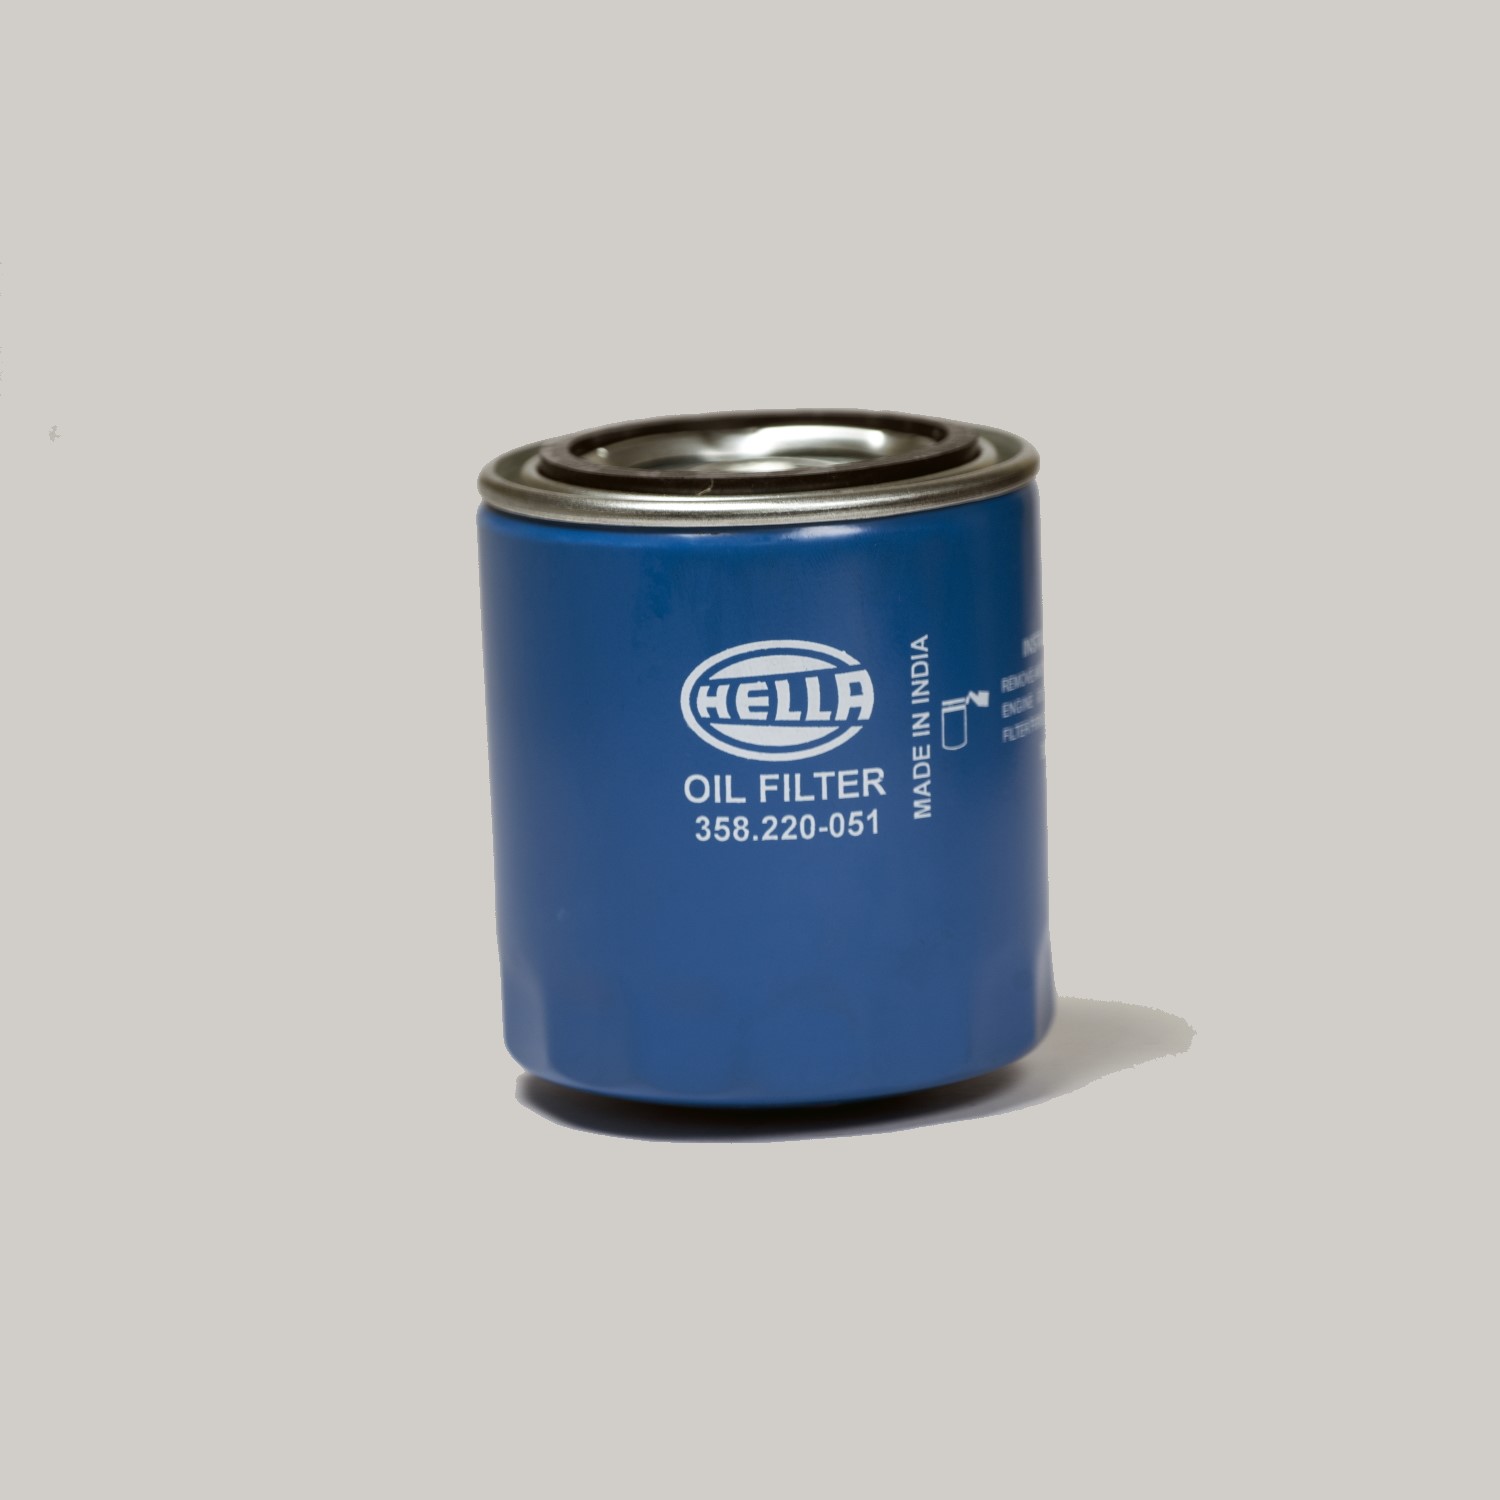 Hella Products Supplier in Bangalore